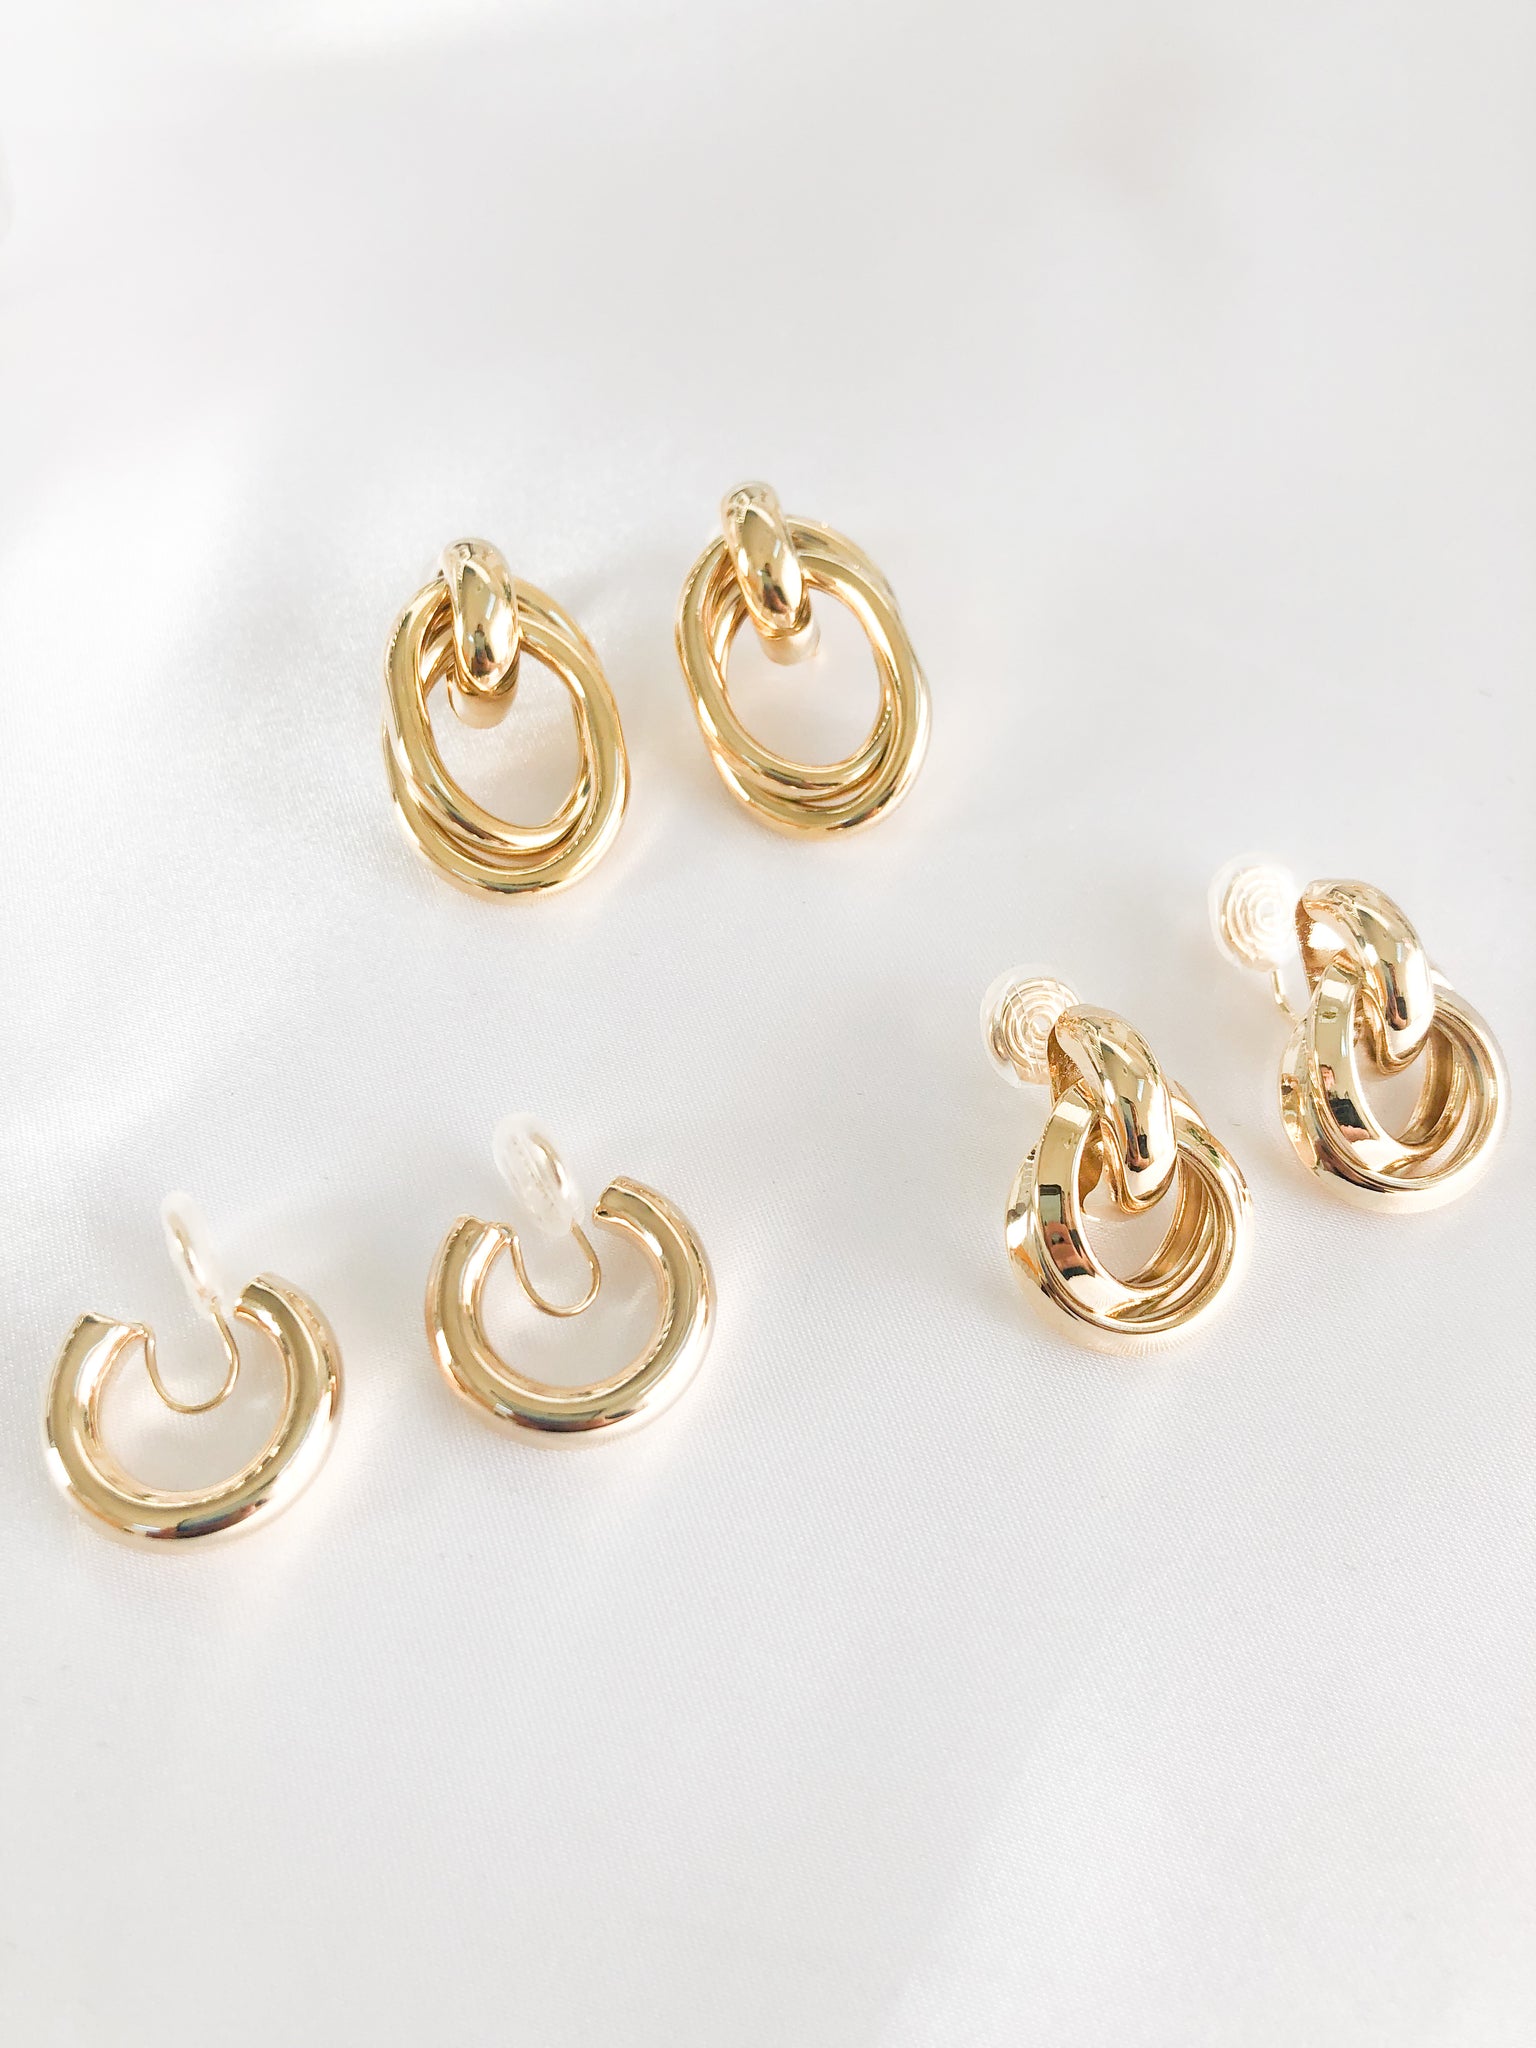 Add some glam to your wardrobe with our bundle of different gold clip-on hoop earrings. This set features four pairs of earrings, each with a unique design. Amy Clip-on Hoops, Allie Clip-on Hoops, and Estelle Clipon Hoops